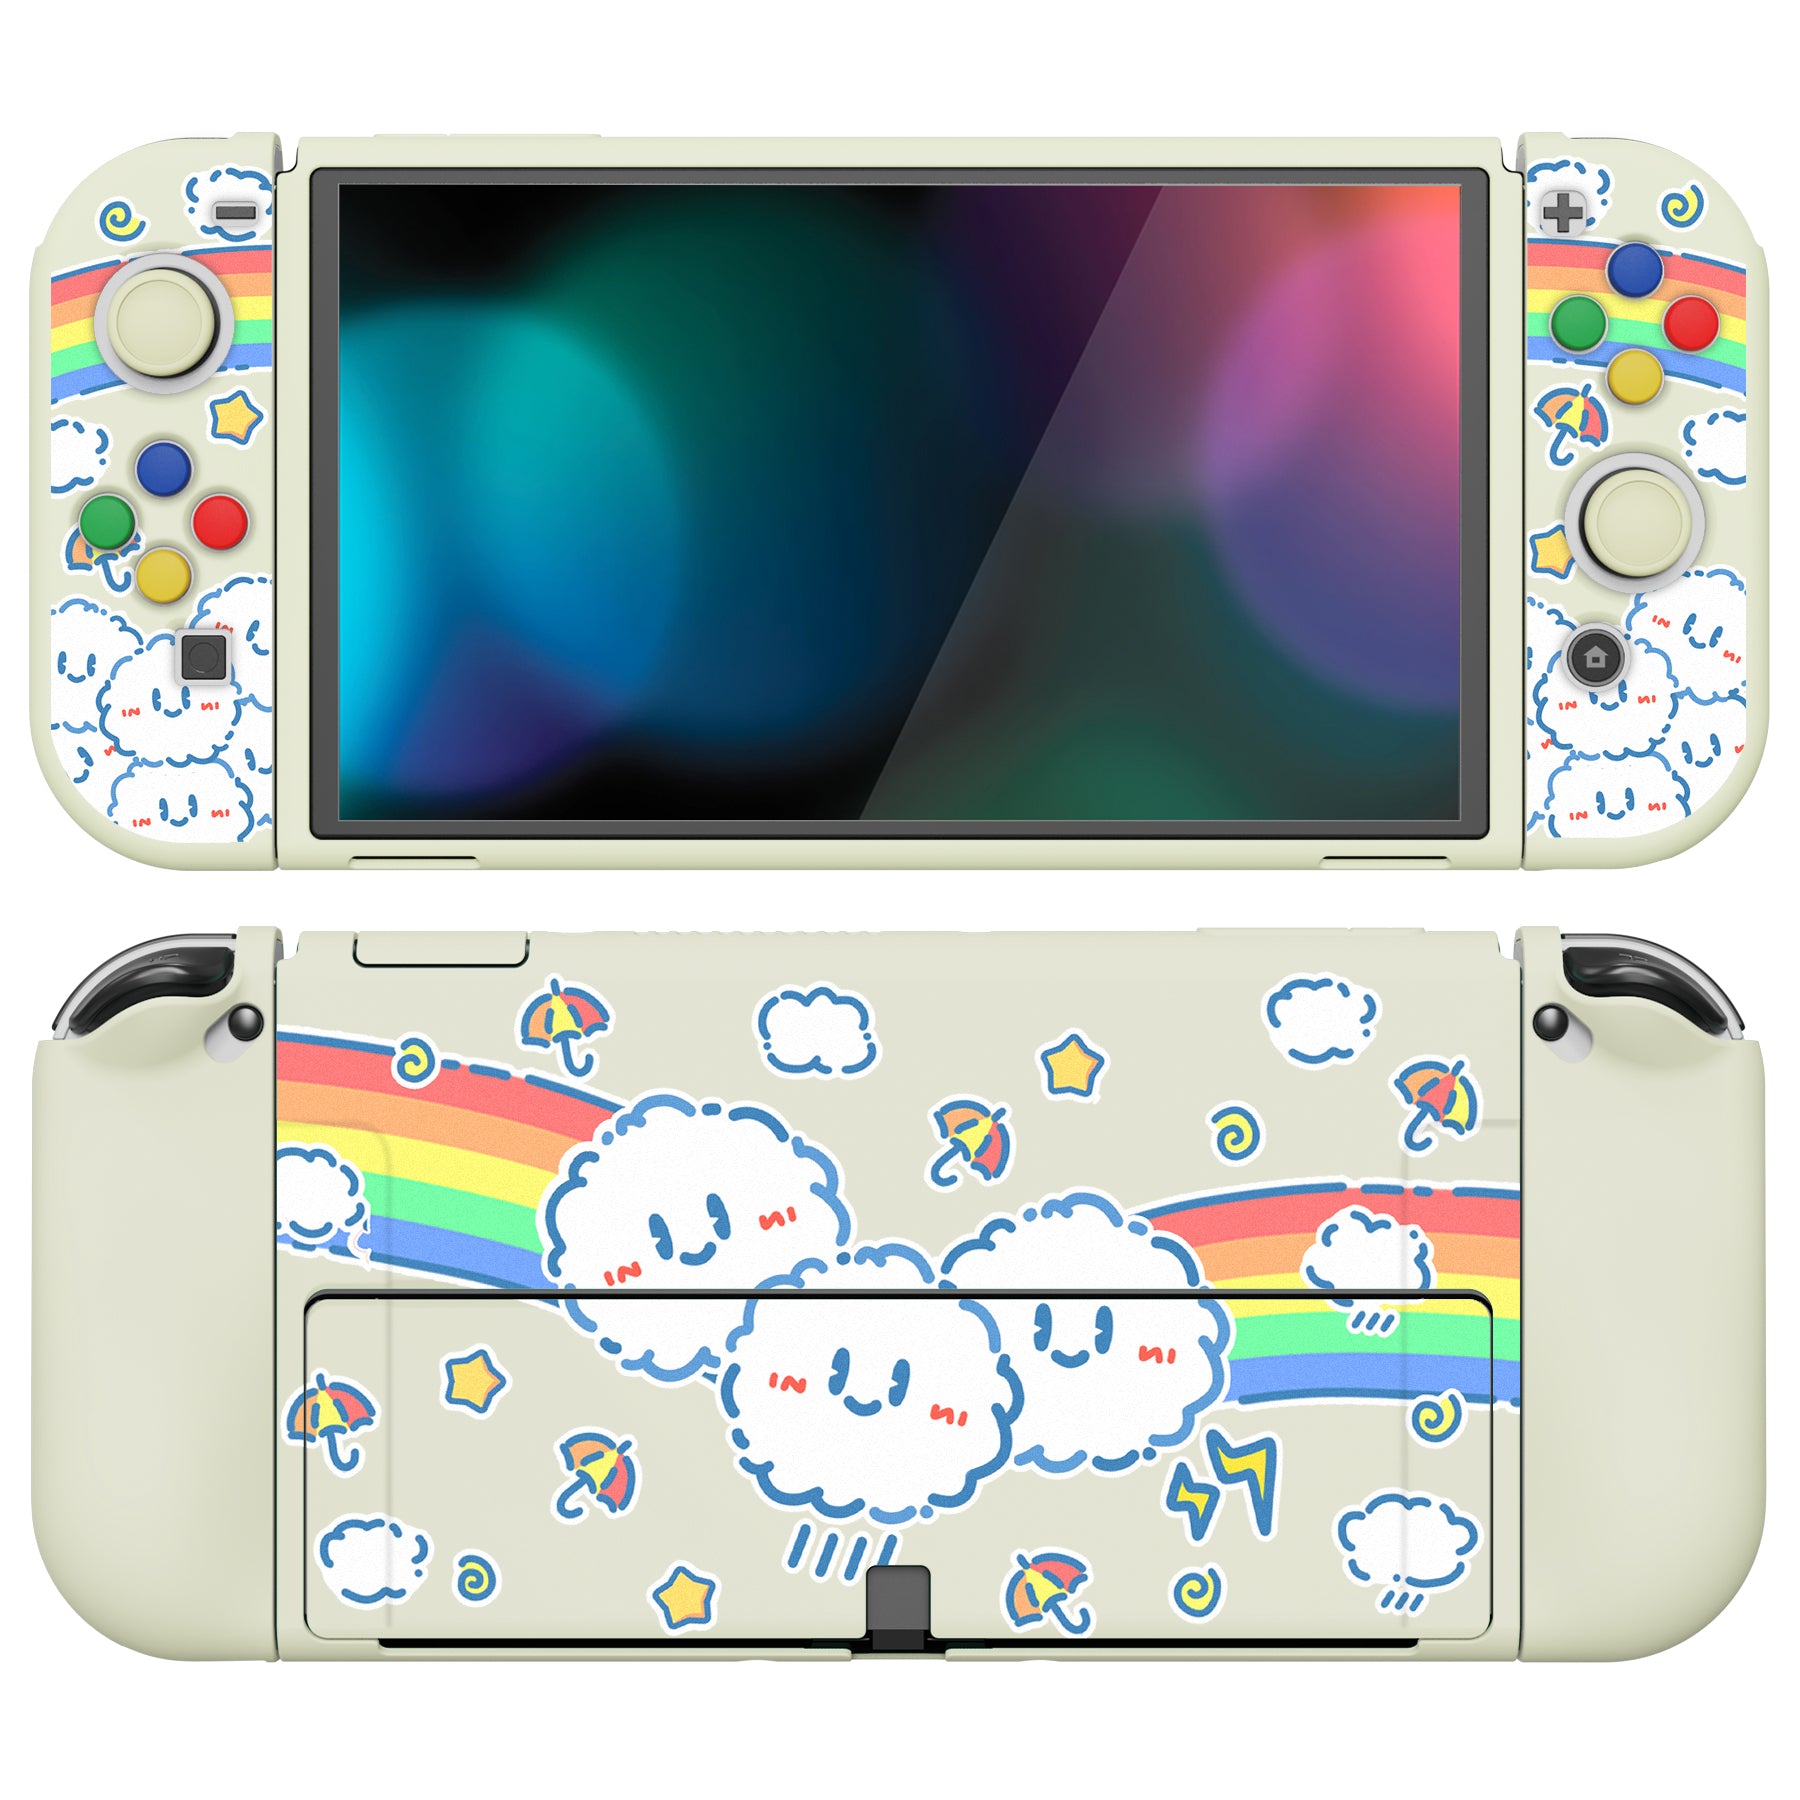 PlayVital ZealProtect Soft Protective Case for Switch OLED, Flexible Protector Joycon Grip Cover for Switch OLED with Thumb Grip Caps & ABXY Direction Button Caps - Rainbow on Cloud - XSOYV6016 playvital